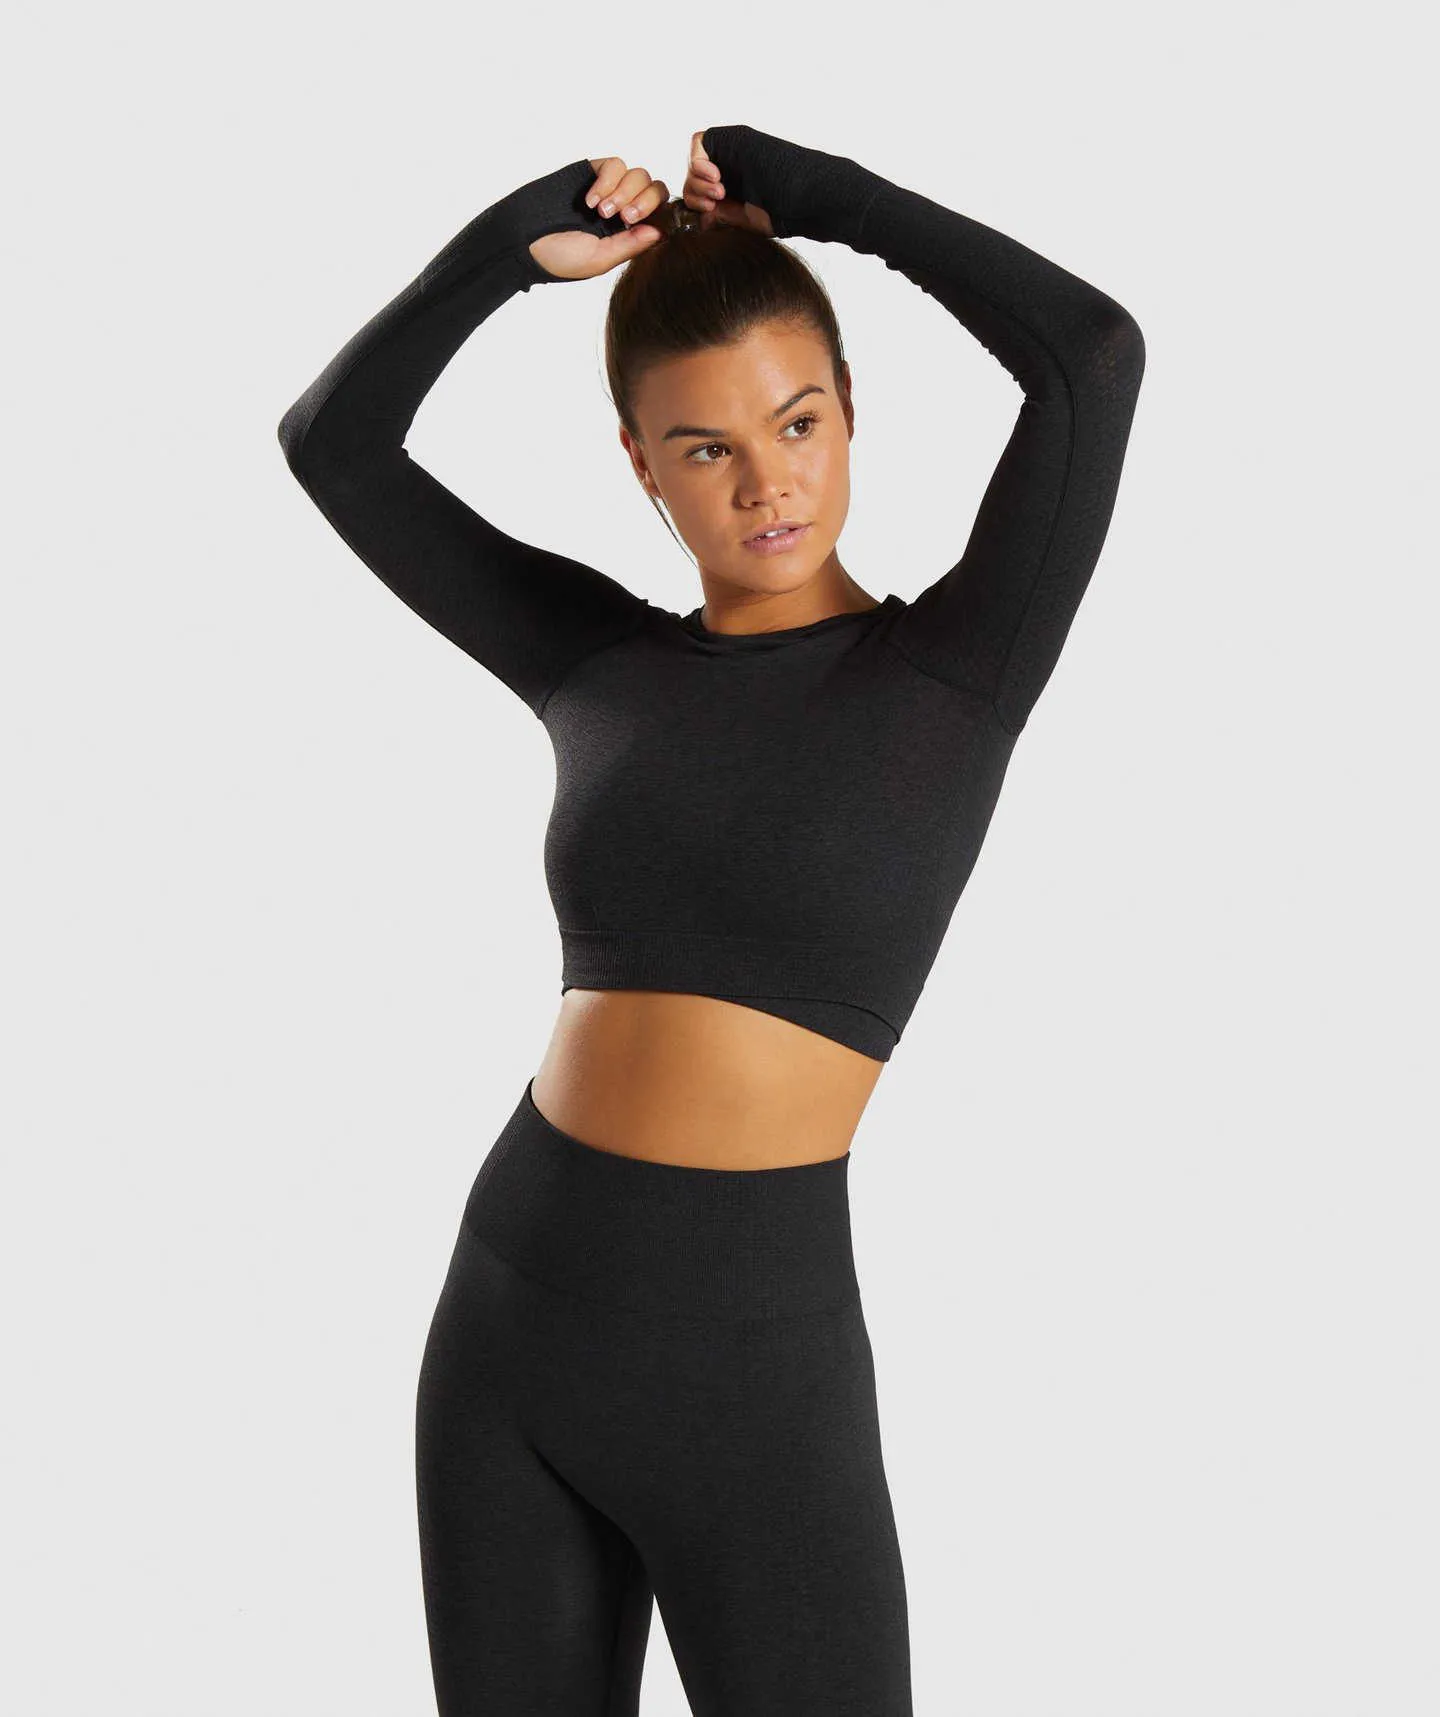 EUYZOU Womens High Waisted Workout Sets 2 Piece - Seamless Sports Legging  long Sleeve Crop Top Yoga Gym Outfits, Black (Legging&long Sleeve Top), M  price in UAE,  UAE